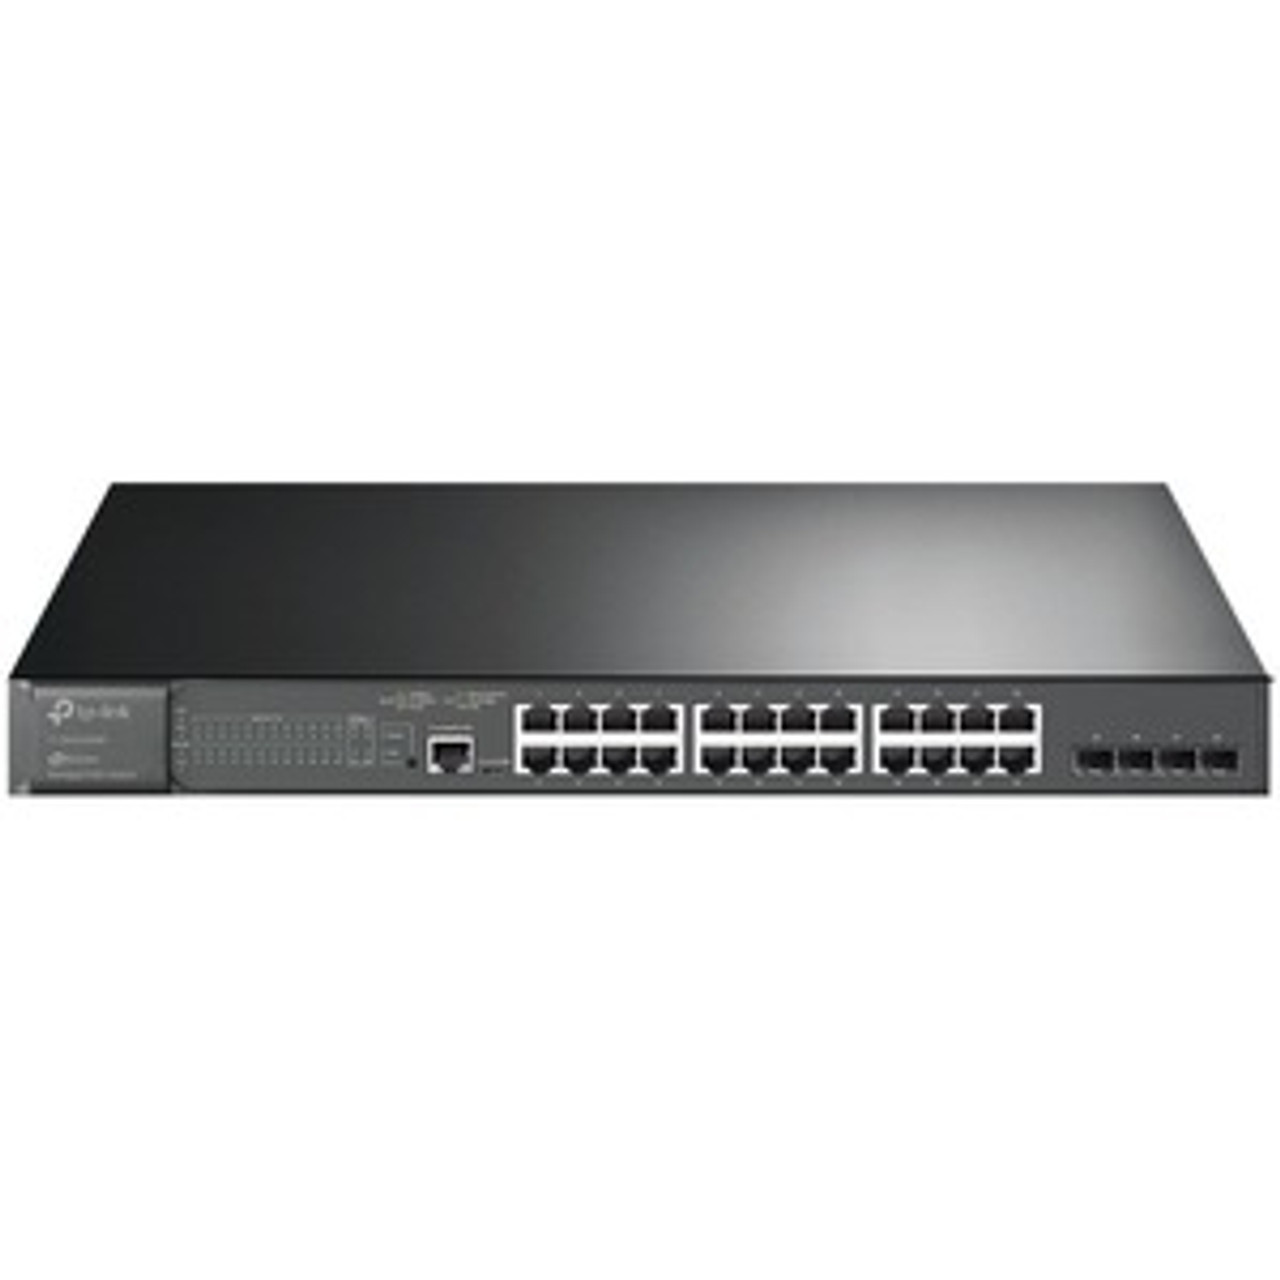 TL-SG3428MP TP-Link JetStream 28-Port Gigabit L2 Managed Switch with 24-Port PoE+ - 24 Ports - Manageable - 2 Layer Supported - Modular - 4 SFP Slots - 463.80 W